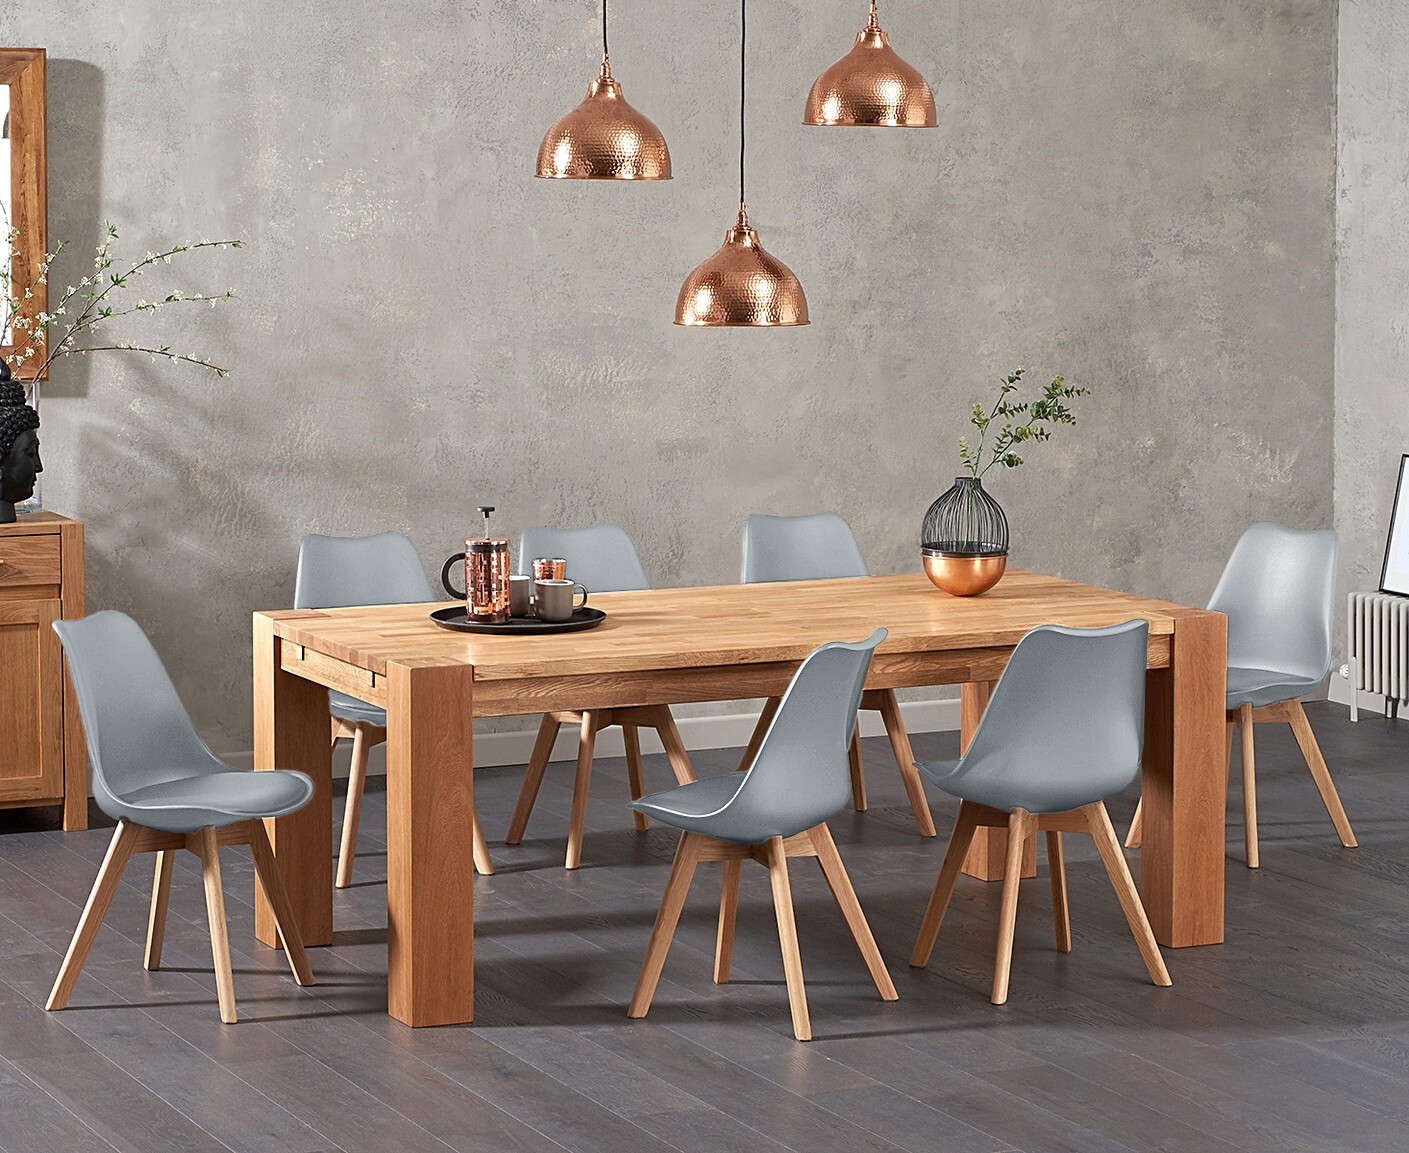 Photo 2 of Sheringham 200cm solid oak dining table with 8 light grey orson chairs